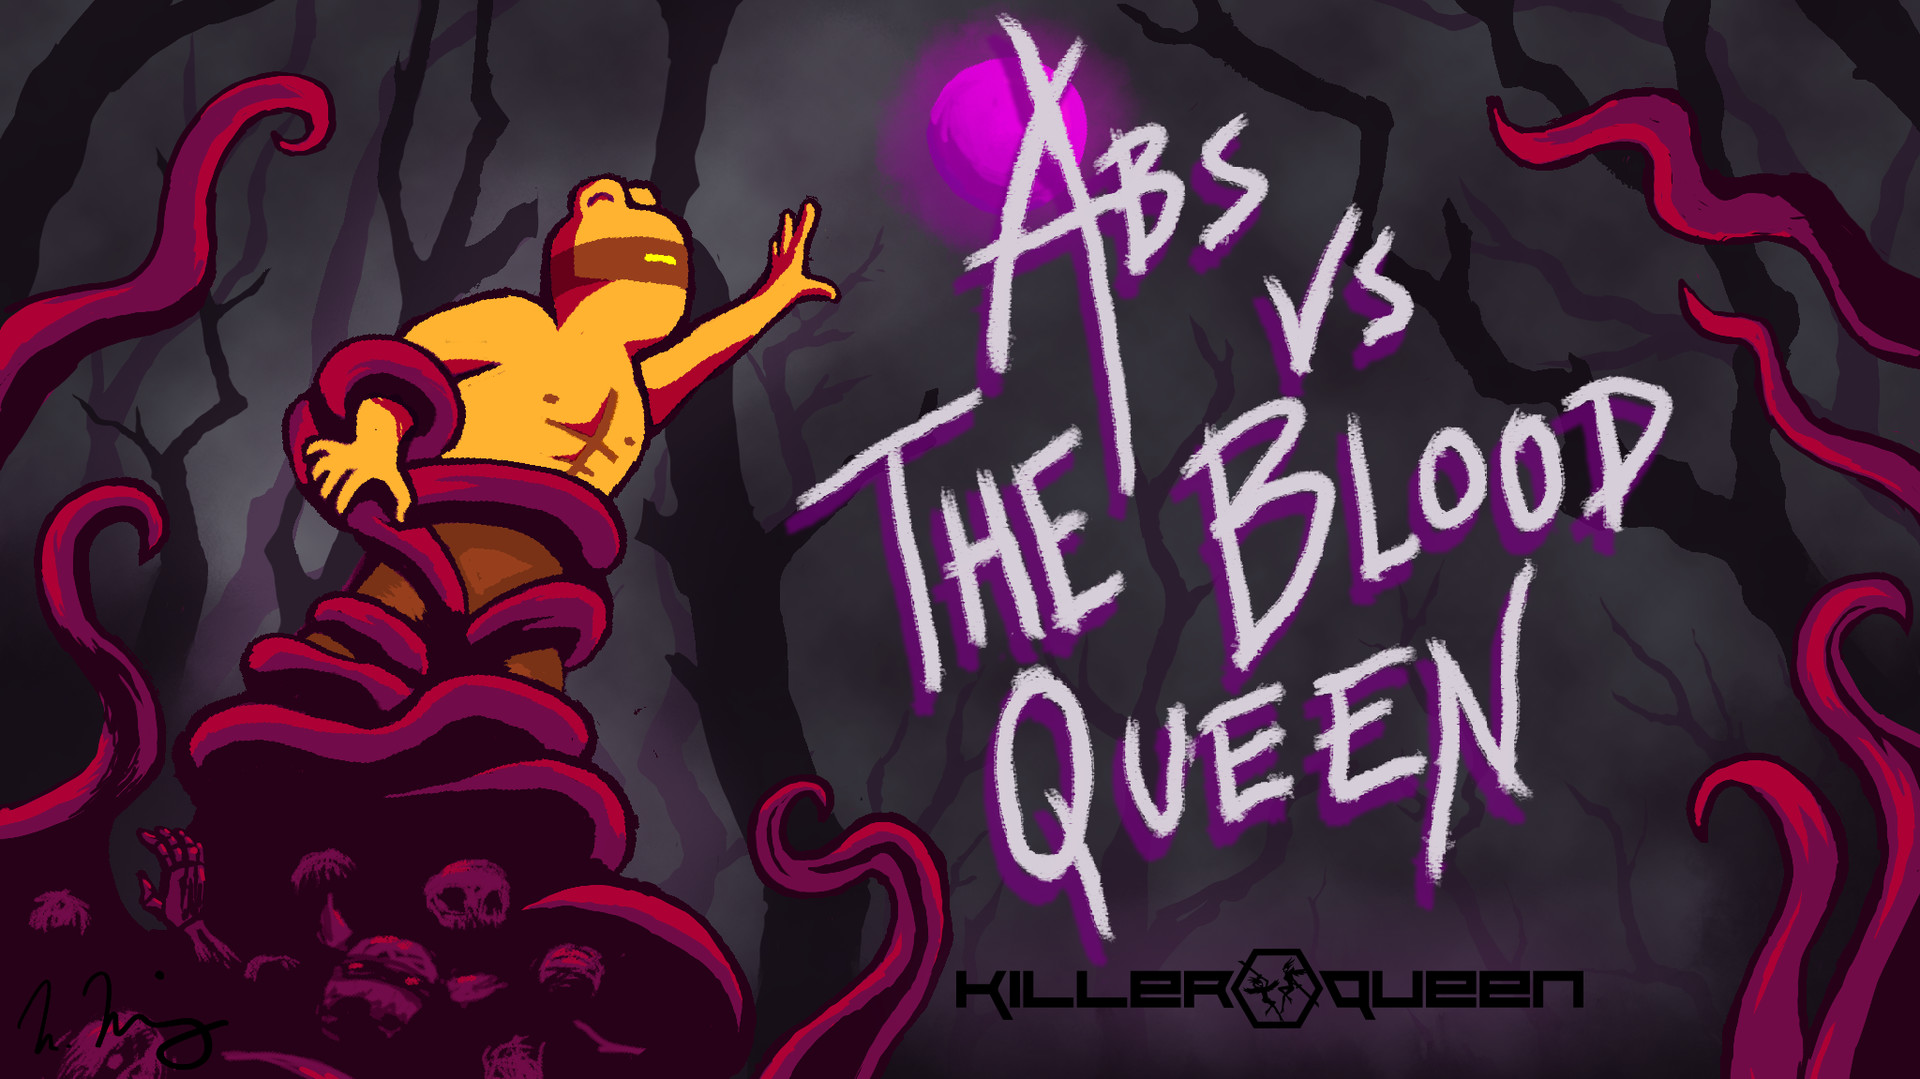 ABS vs THE BLOOD QUEEN Free Download